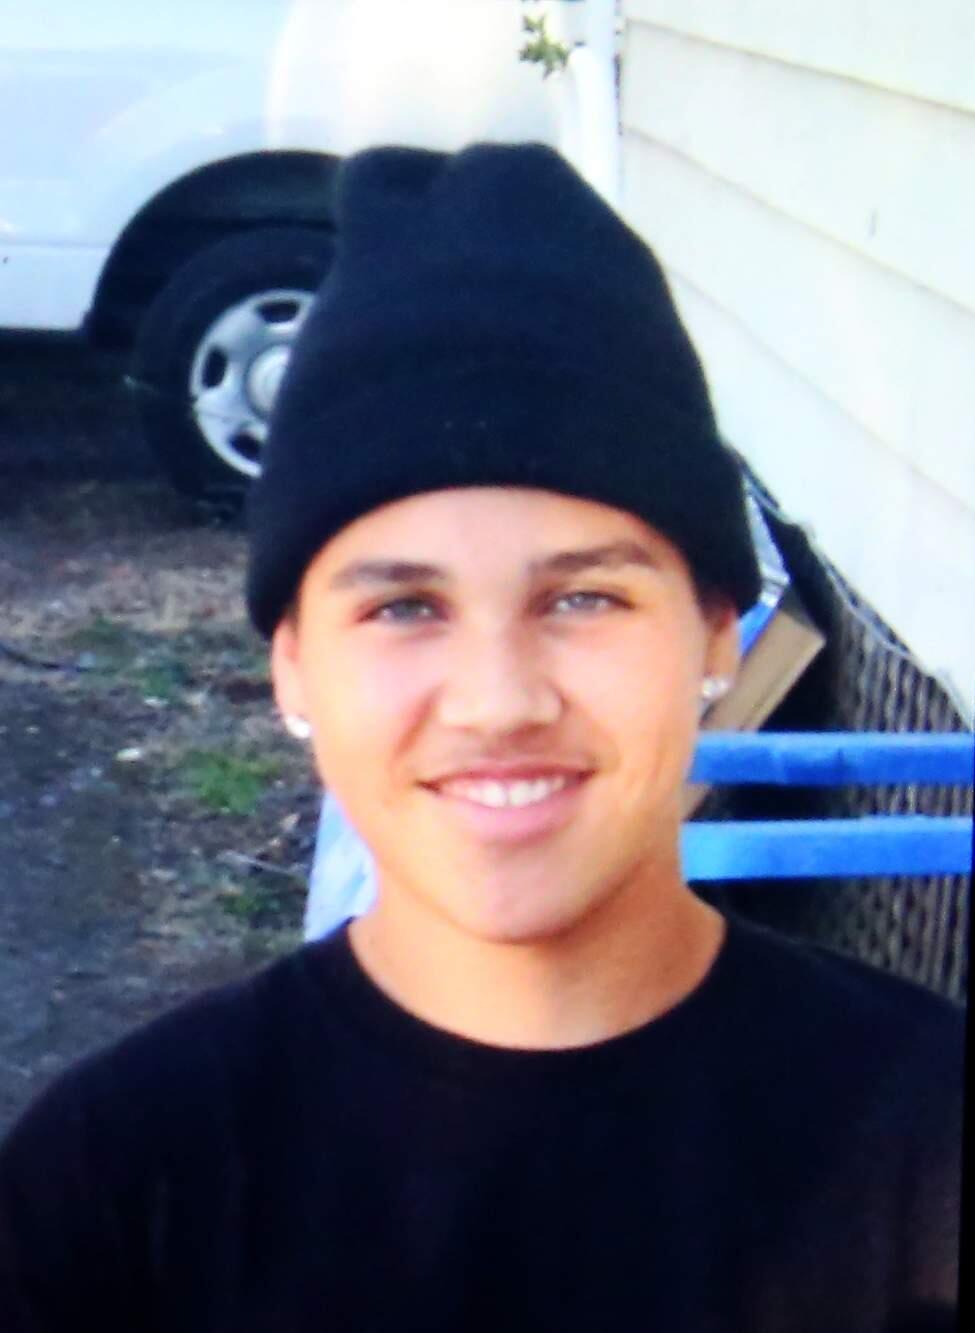 1/30/2014: A1: Andy Lopez : Teen was shot dead Oct. 22 by a sheriff's deputy.1/3/2014:A1: Andy Lopez12/29/2013:A7: Andy Lopez10/29/2013:A1: Andy Lopez10/28/2013:A7: Andy Lopez10/26/2013:A11:Andy Lopez10/25/2013:A1: Andy Lopez10/24/2013: A1:Andy Lopez10/23/2013:A1: Andy LopezPC: A picture of Andy Lopez, 13, is shown on his fatehrs phone on Tuesday, October 22, 2013. Lopez was shot and killed by officer after being scene carrying what appeared to be a pellet gun modeled after an AK-47. (Conner Jay/The Press Democrat)